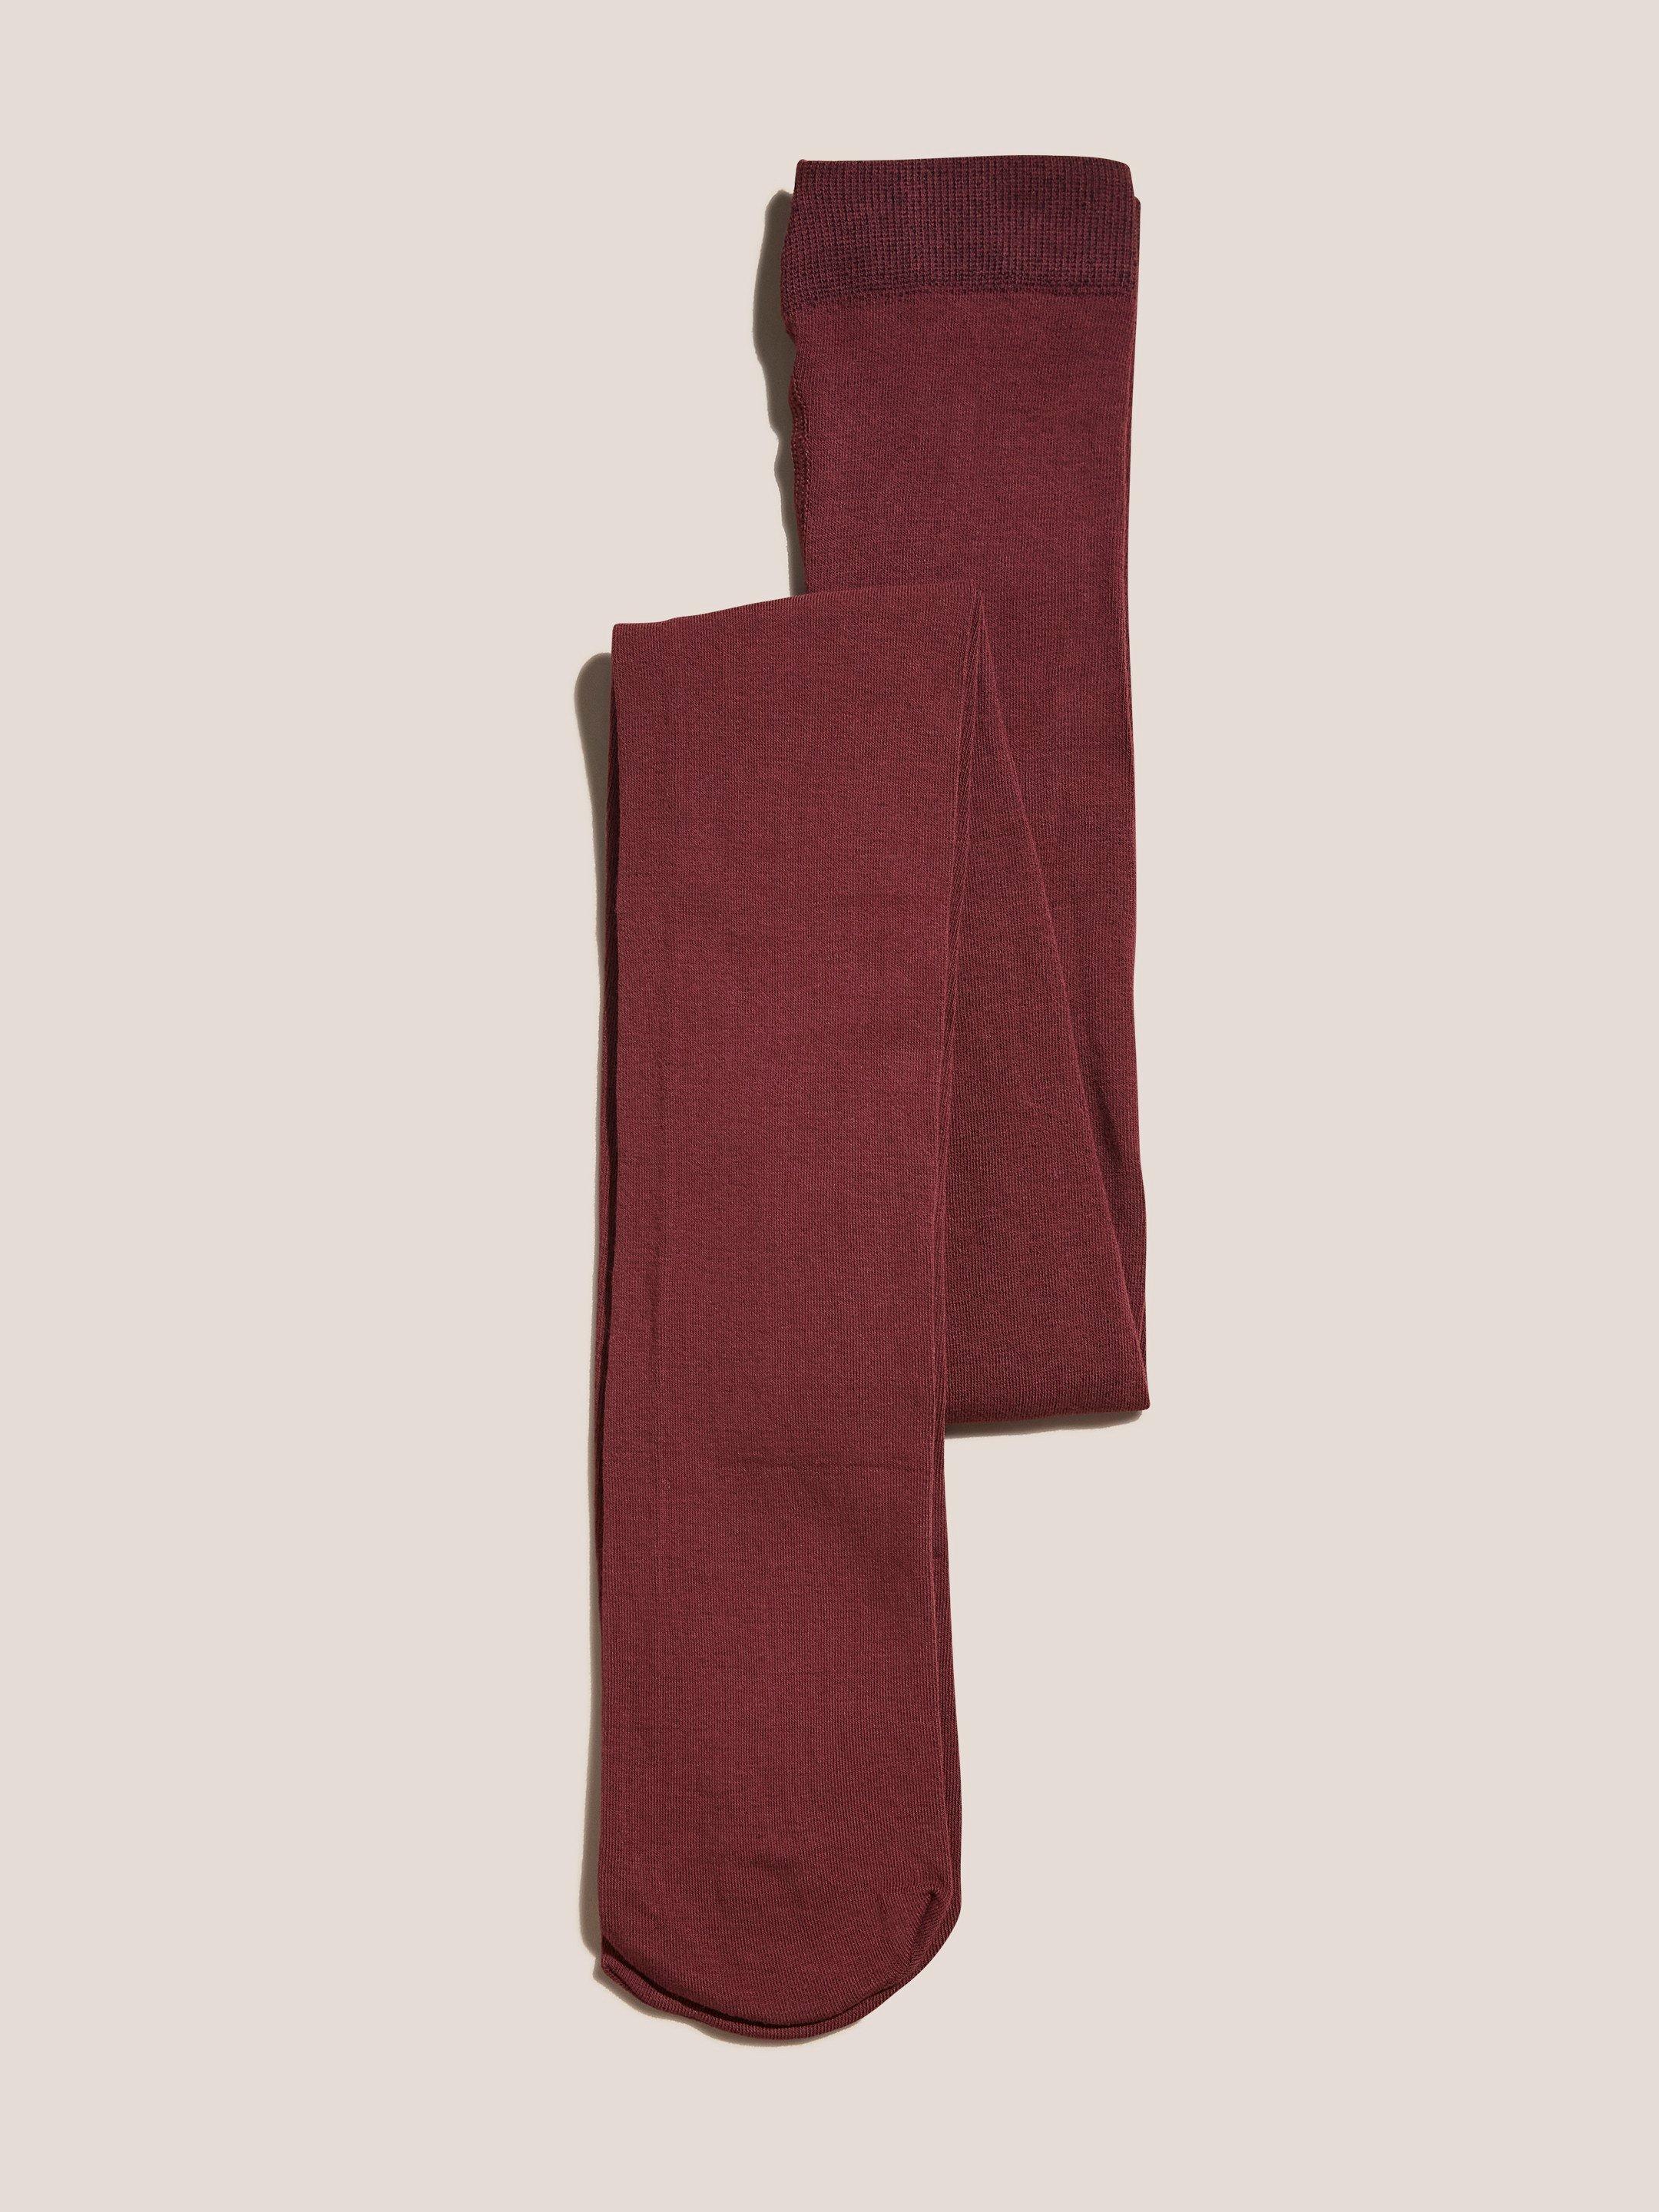 Patty Plain  Versatile Tights in MID RED - FLAT BACK